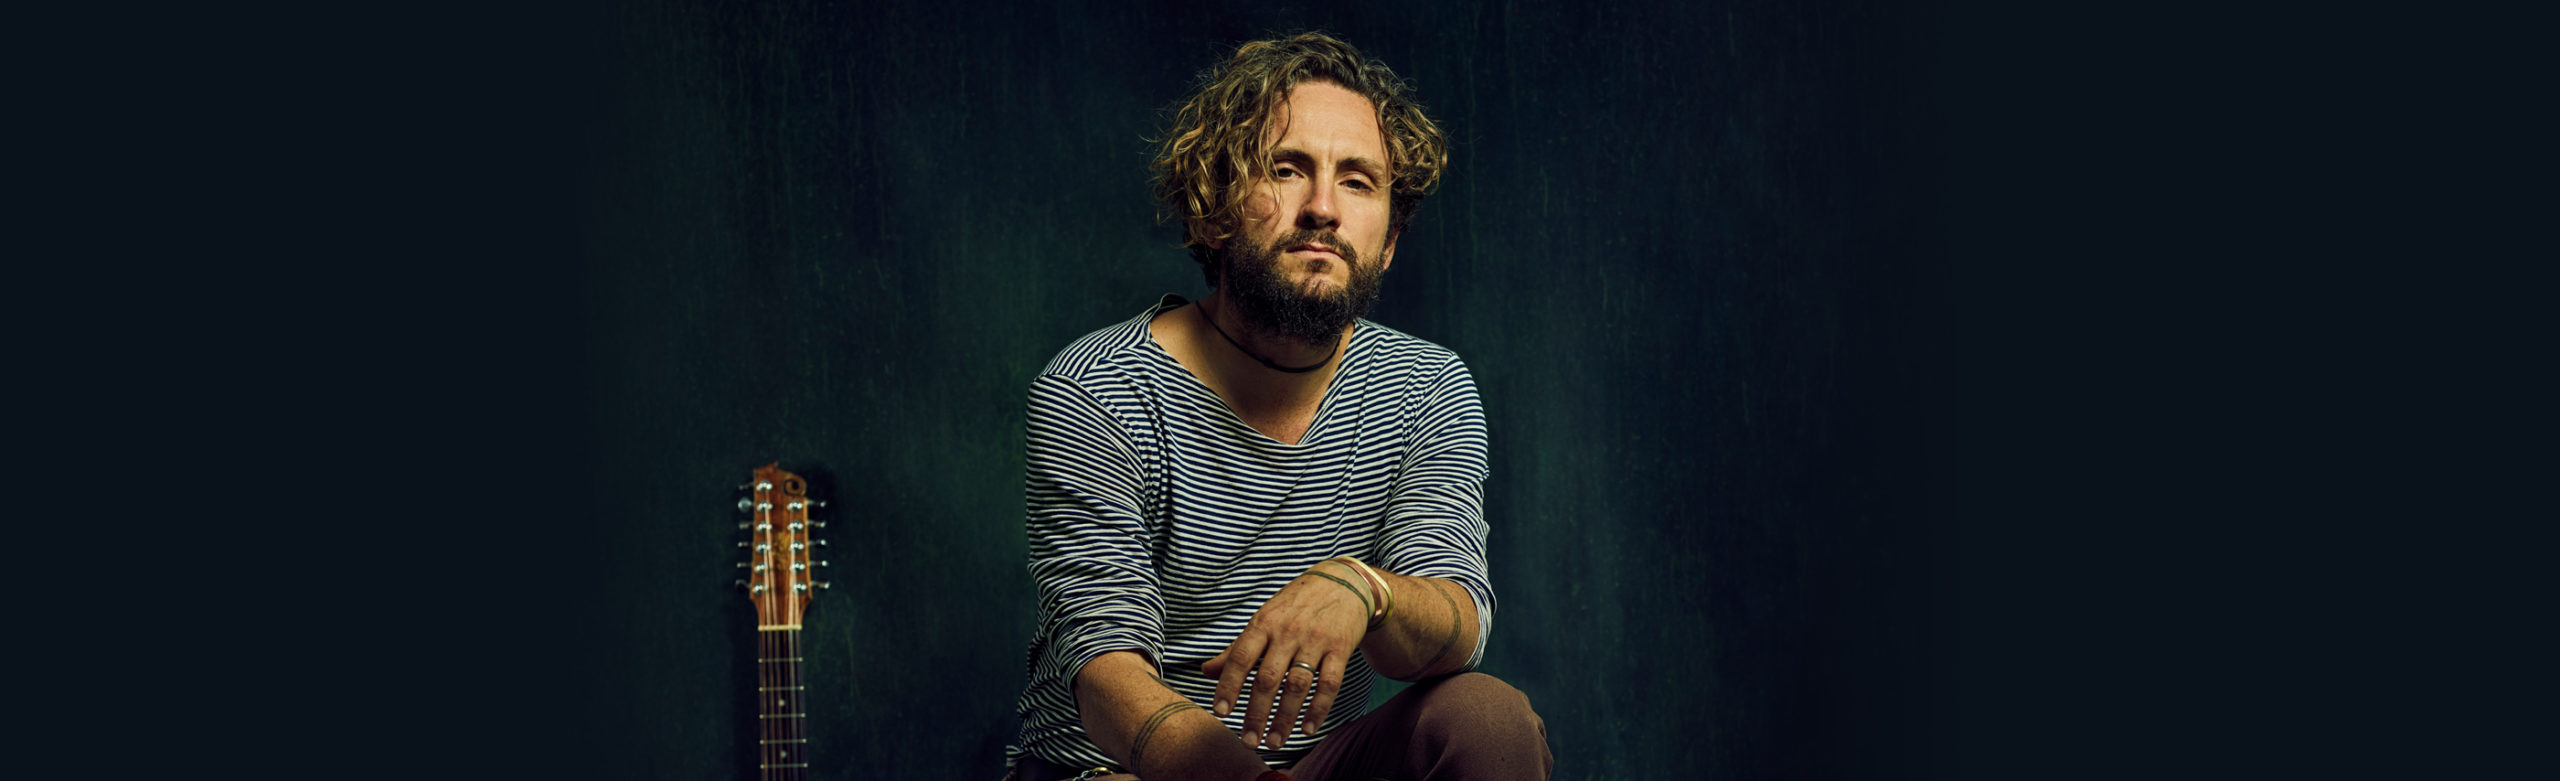 Roots Rock Band John Butler Trio+ Announces Montana Concert with Trevor Hall Image